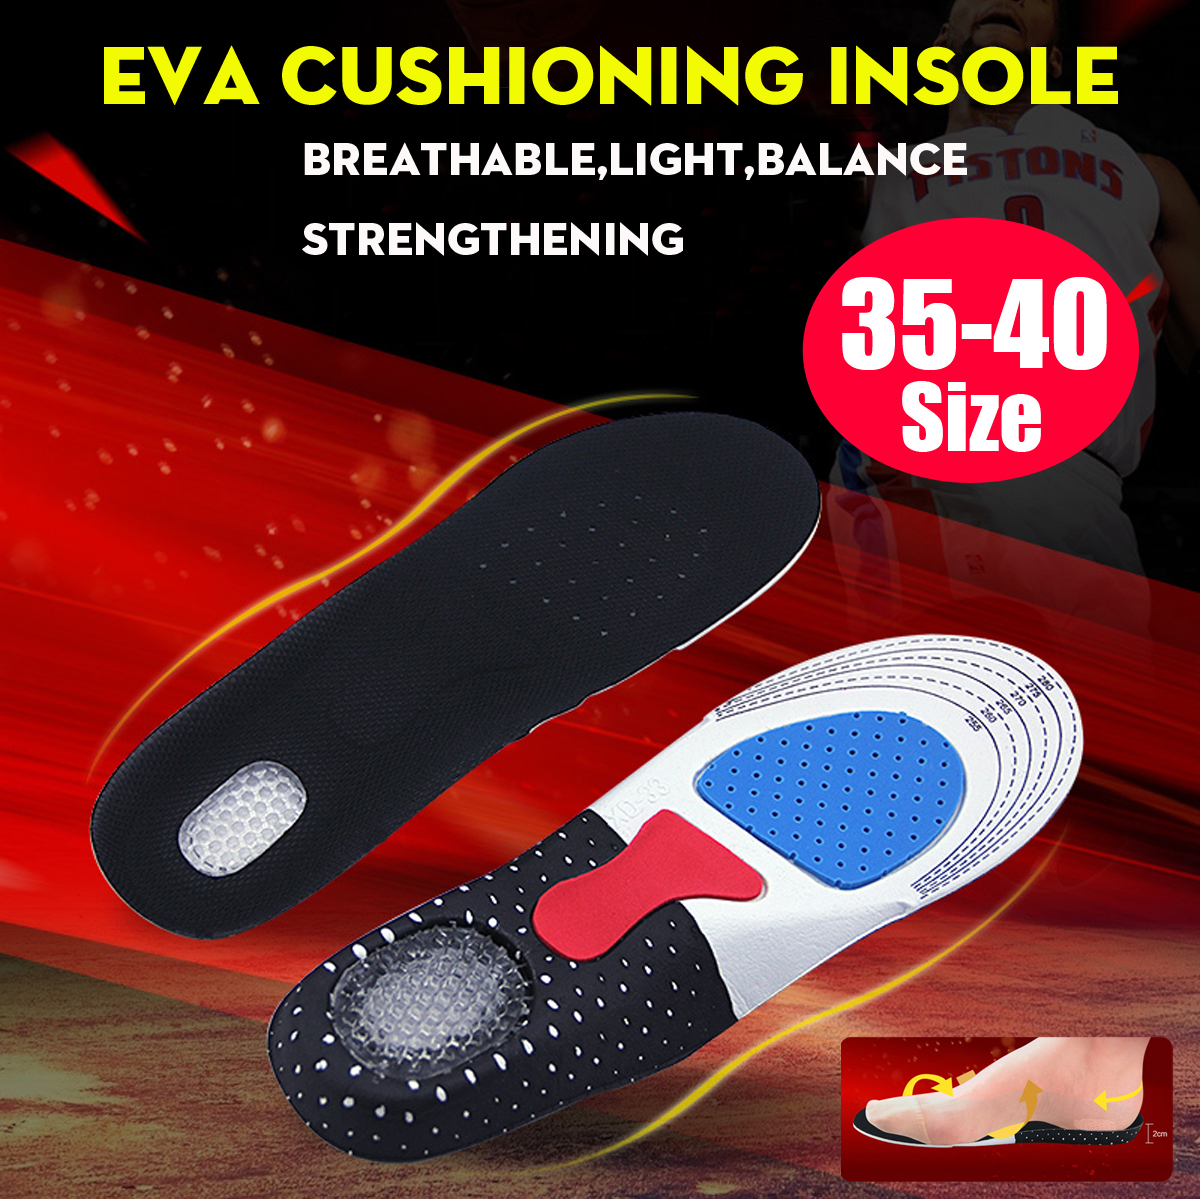 35-40-Size-Men-Women-Fashion-Silica-Gel-Insole-EVA-Cushioning-Insole-Orthotic-Sport-Running-Shoes-In-1426367